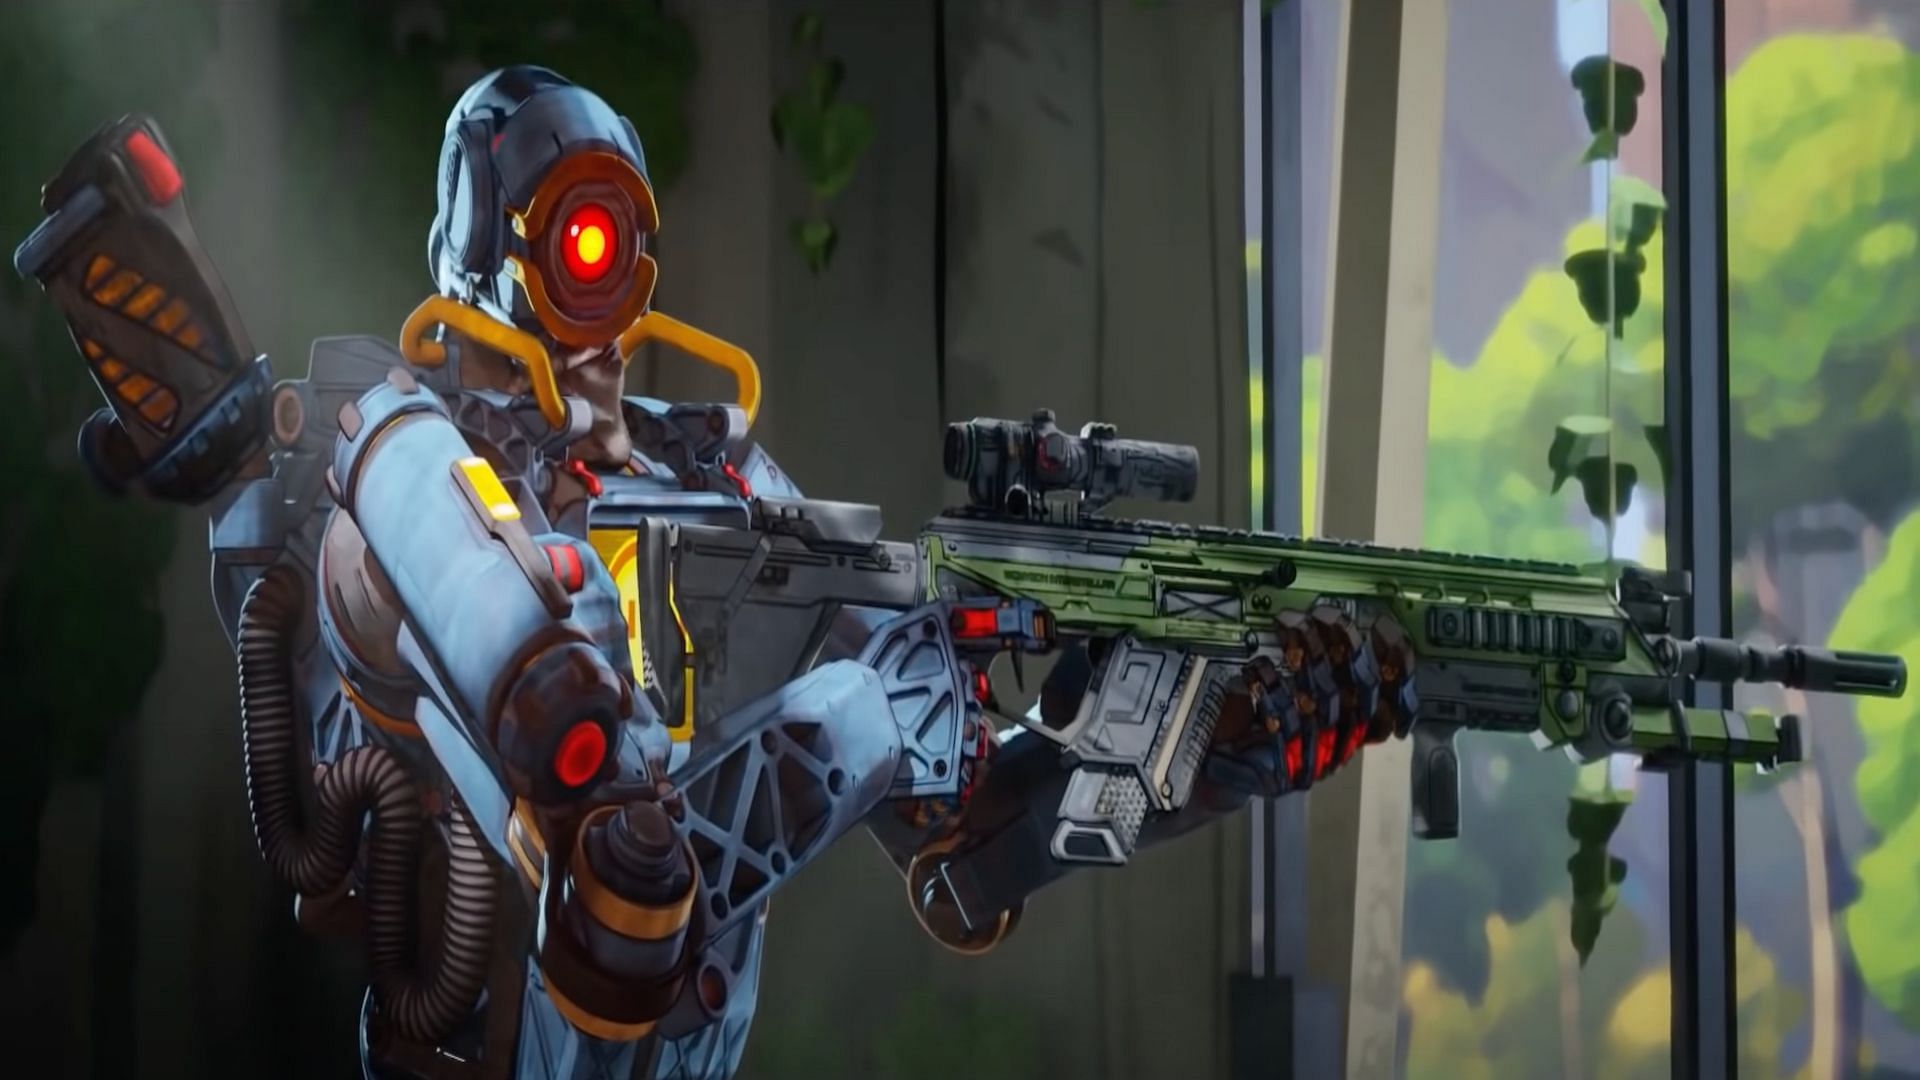 Pathfinder is one of the most popular characters in Apex Legends (Image via Respawn Entertainment)